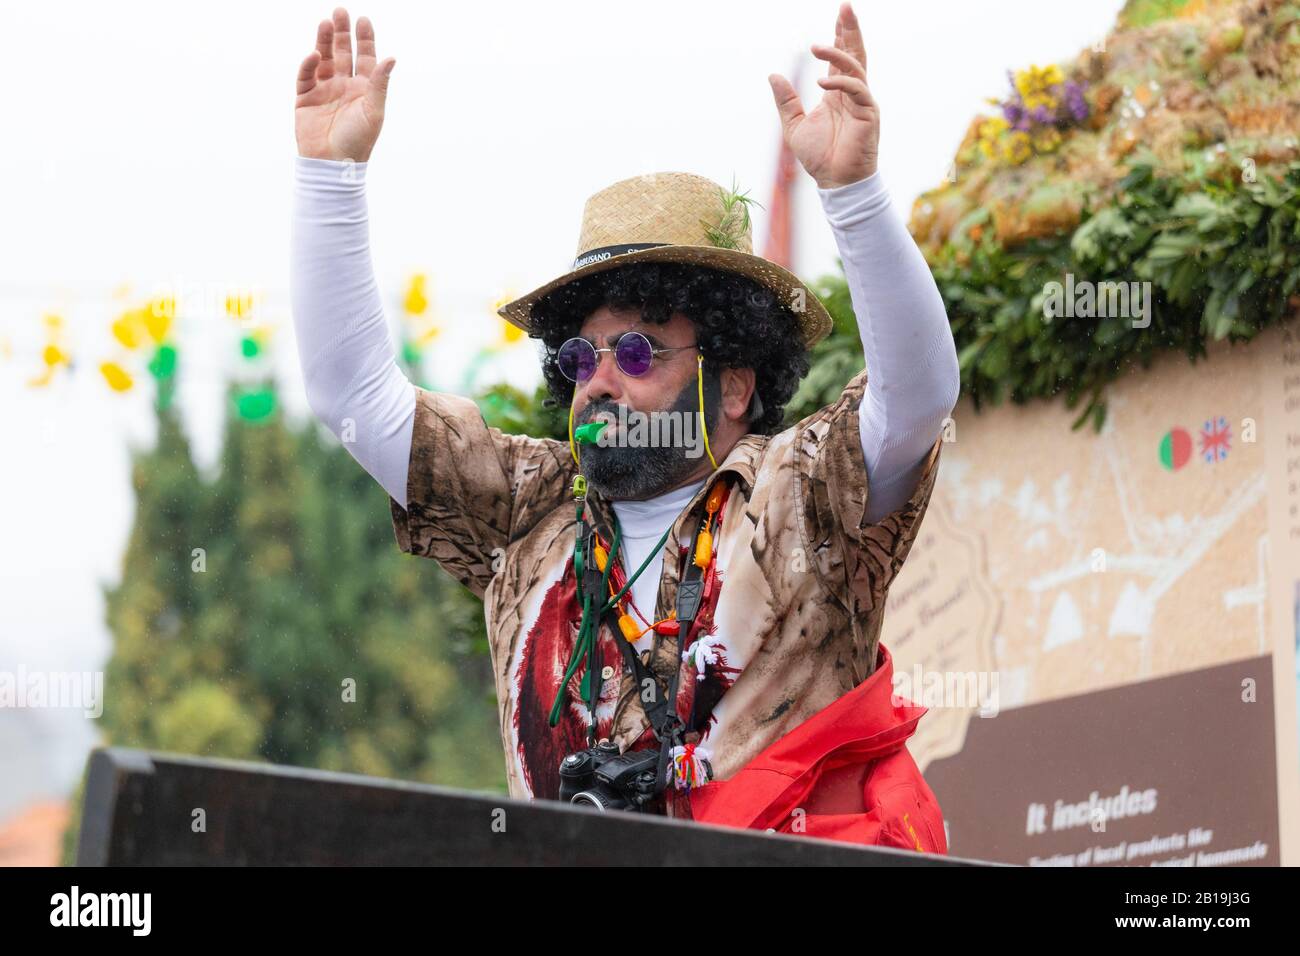 SANTANA, PORTUGAL - FEBRUARY 2020: Participants of the 'Festa dos Compadres' dancing in the parade in Santana, Madeira island, Portugal. Stock Photo